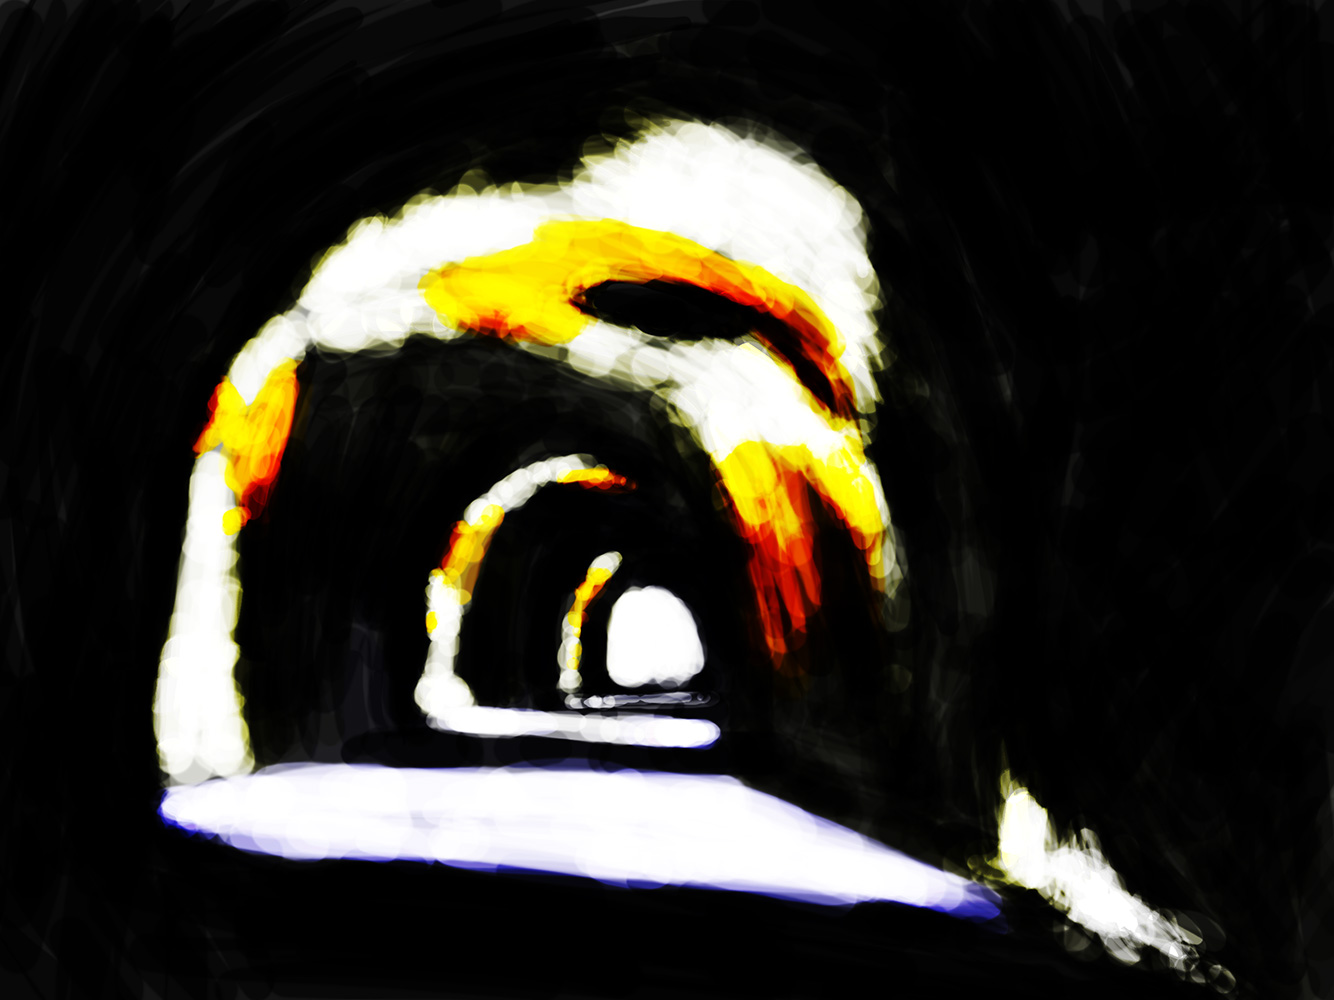 Tunnel Vision, iPad drawing by Guido Vrolix